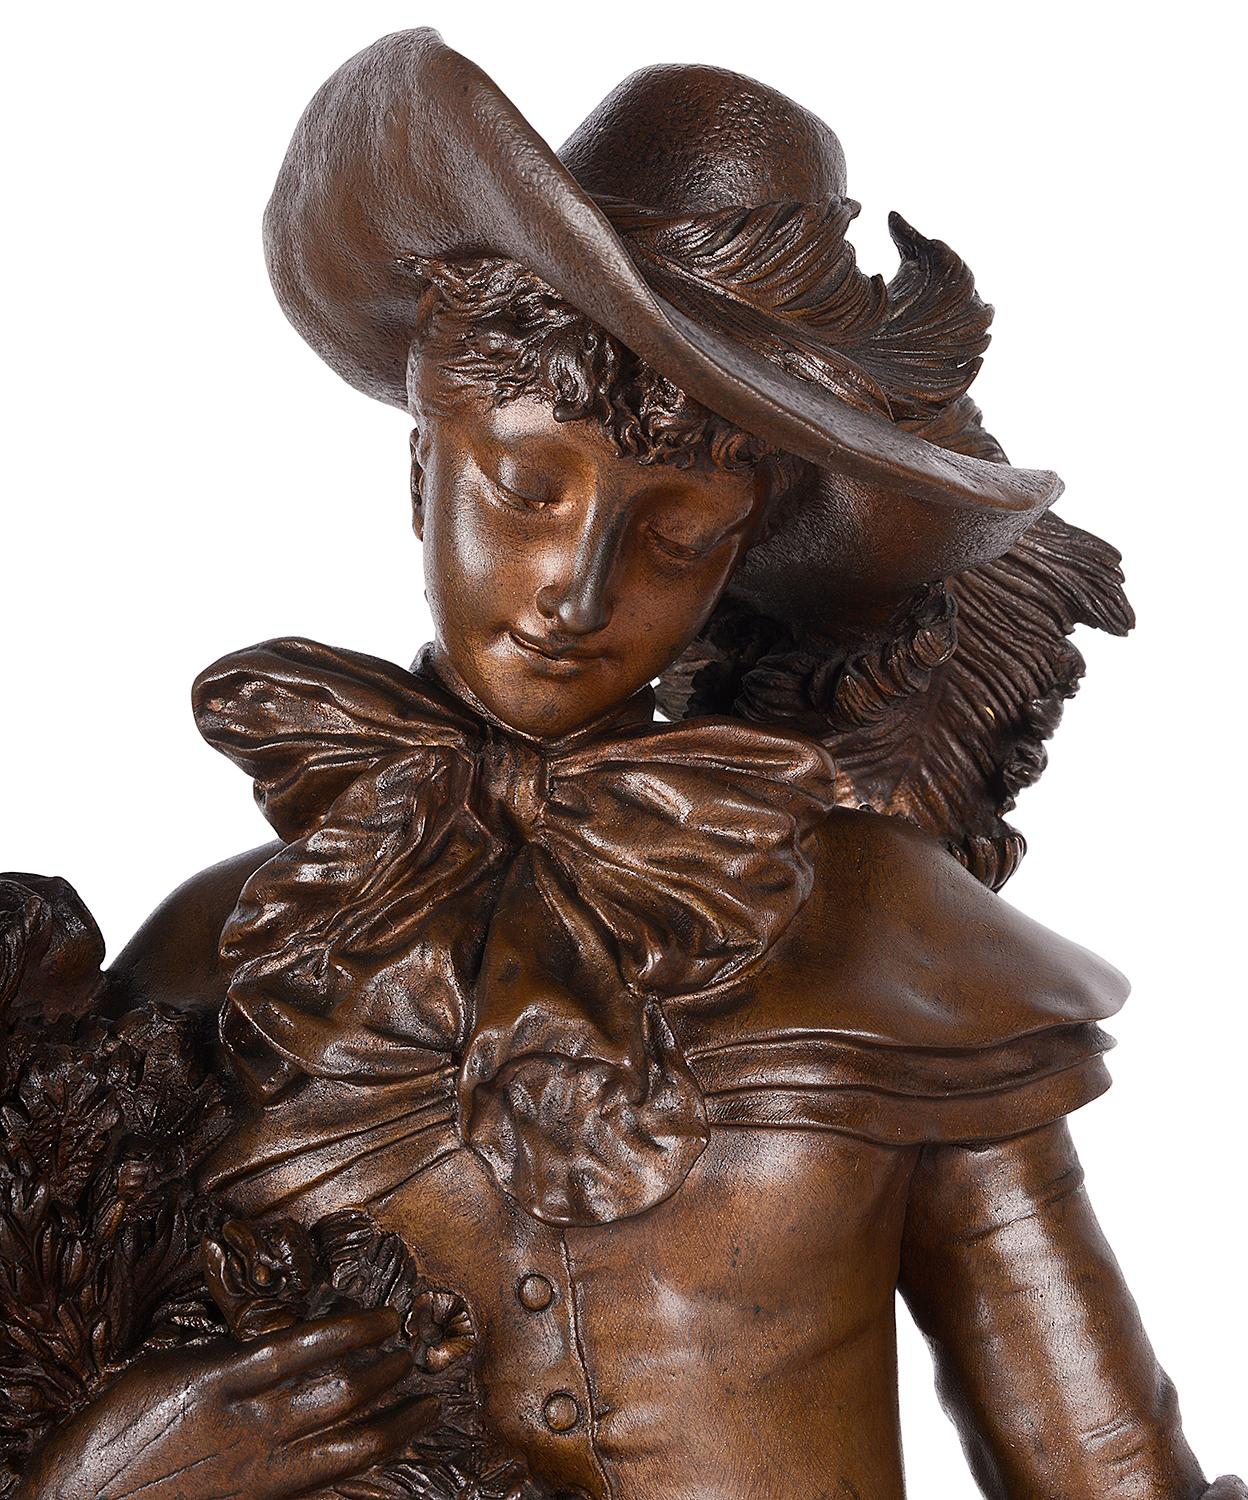 A very good quality 19th century patinated bronze statue of a young lady wearing bonnet, holding a basket of flowers with a Borzoi hound at her side.
Signed; Adrien Étienne Gaudez 

Adrien Étienne Gaudez was a French artist known for his